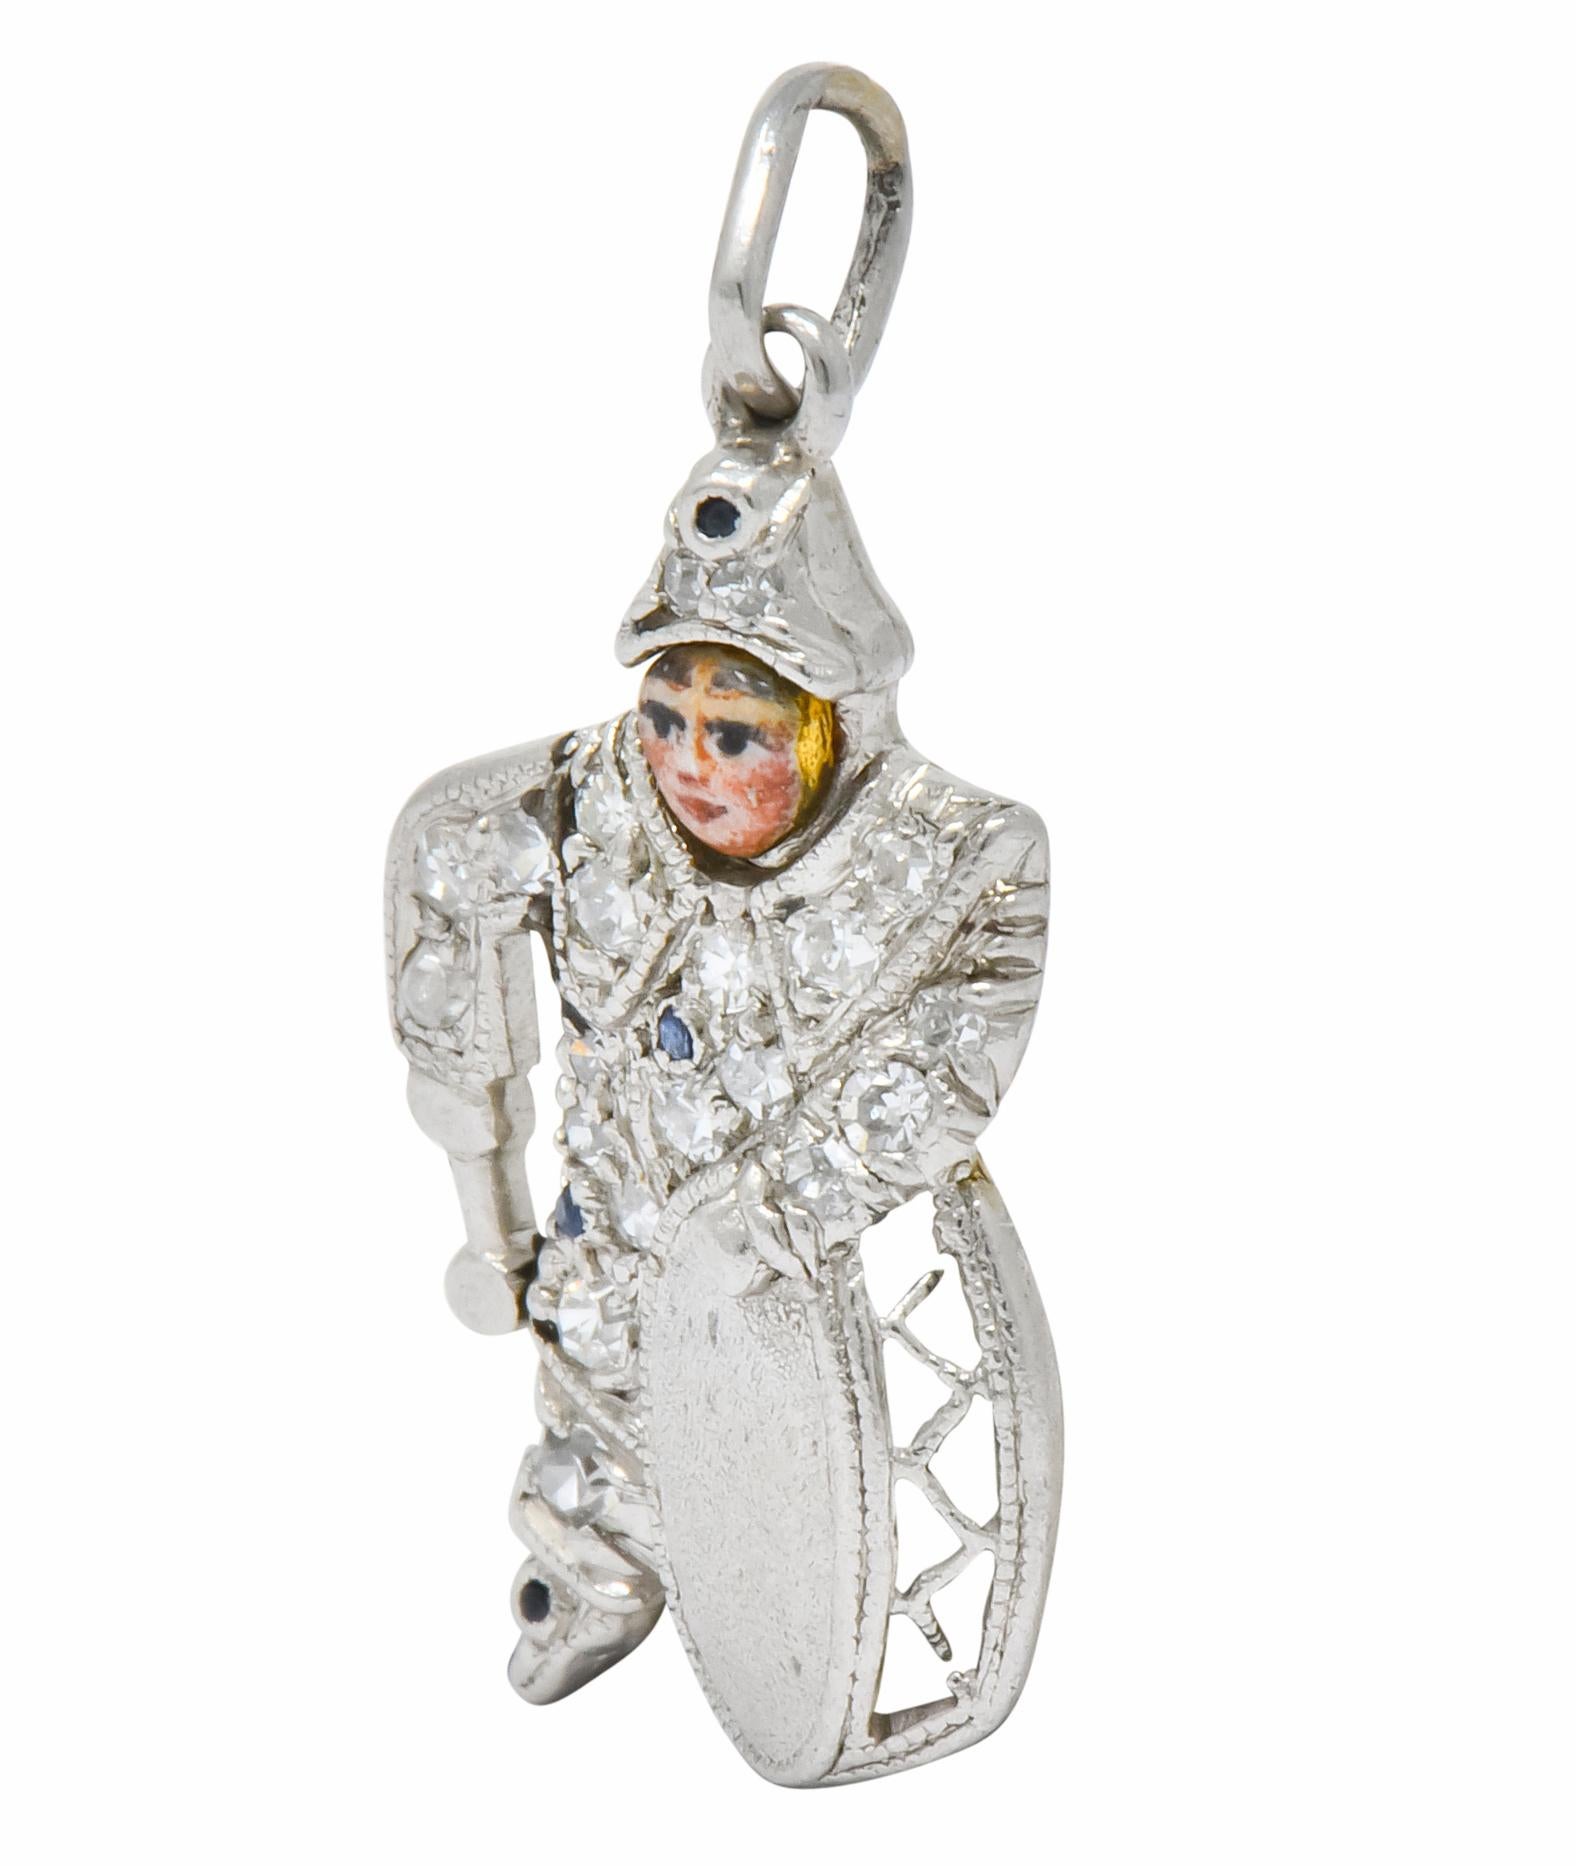 Designed as a little drummer boy with a highly detailed enamel face

Set throughout by rose cut diamonds and blue sapphire accents

With millegrain detail

Tested as platinum

Measures: Approx. 3/4 x 1/3 Inch

Total Weight: 1.2 Grams

Fun. Amusing.